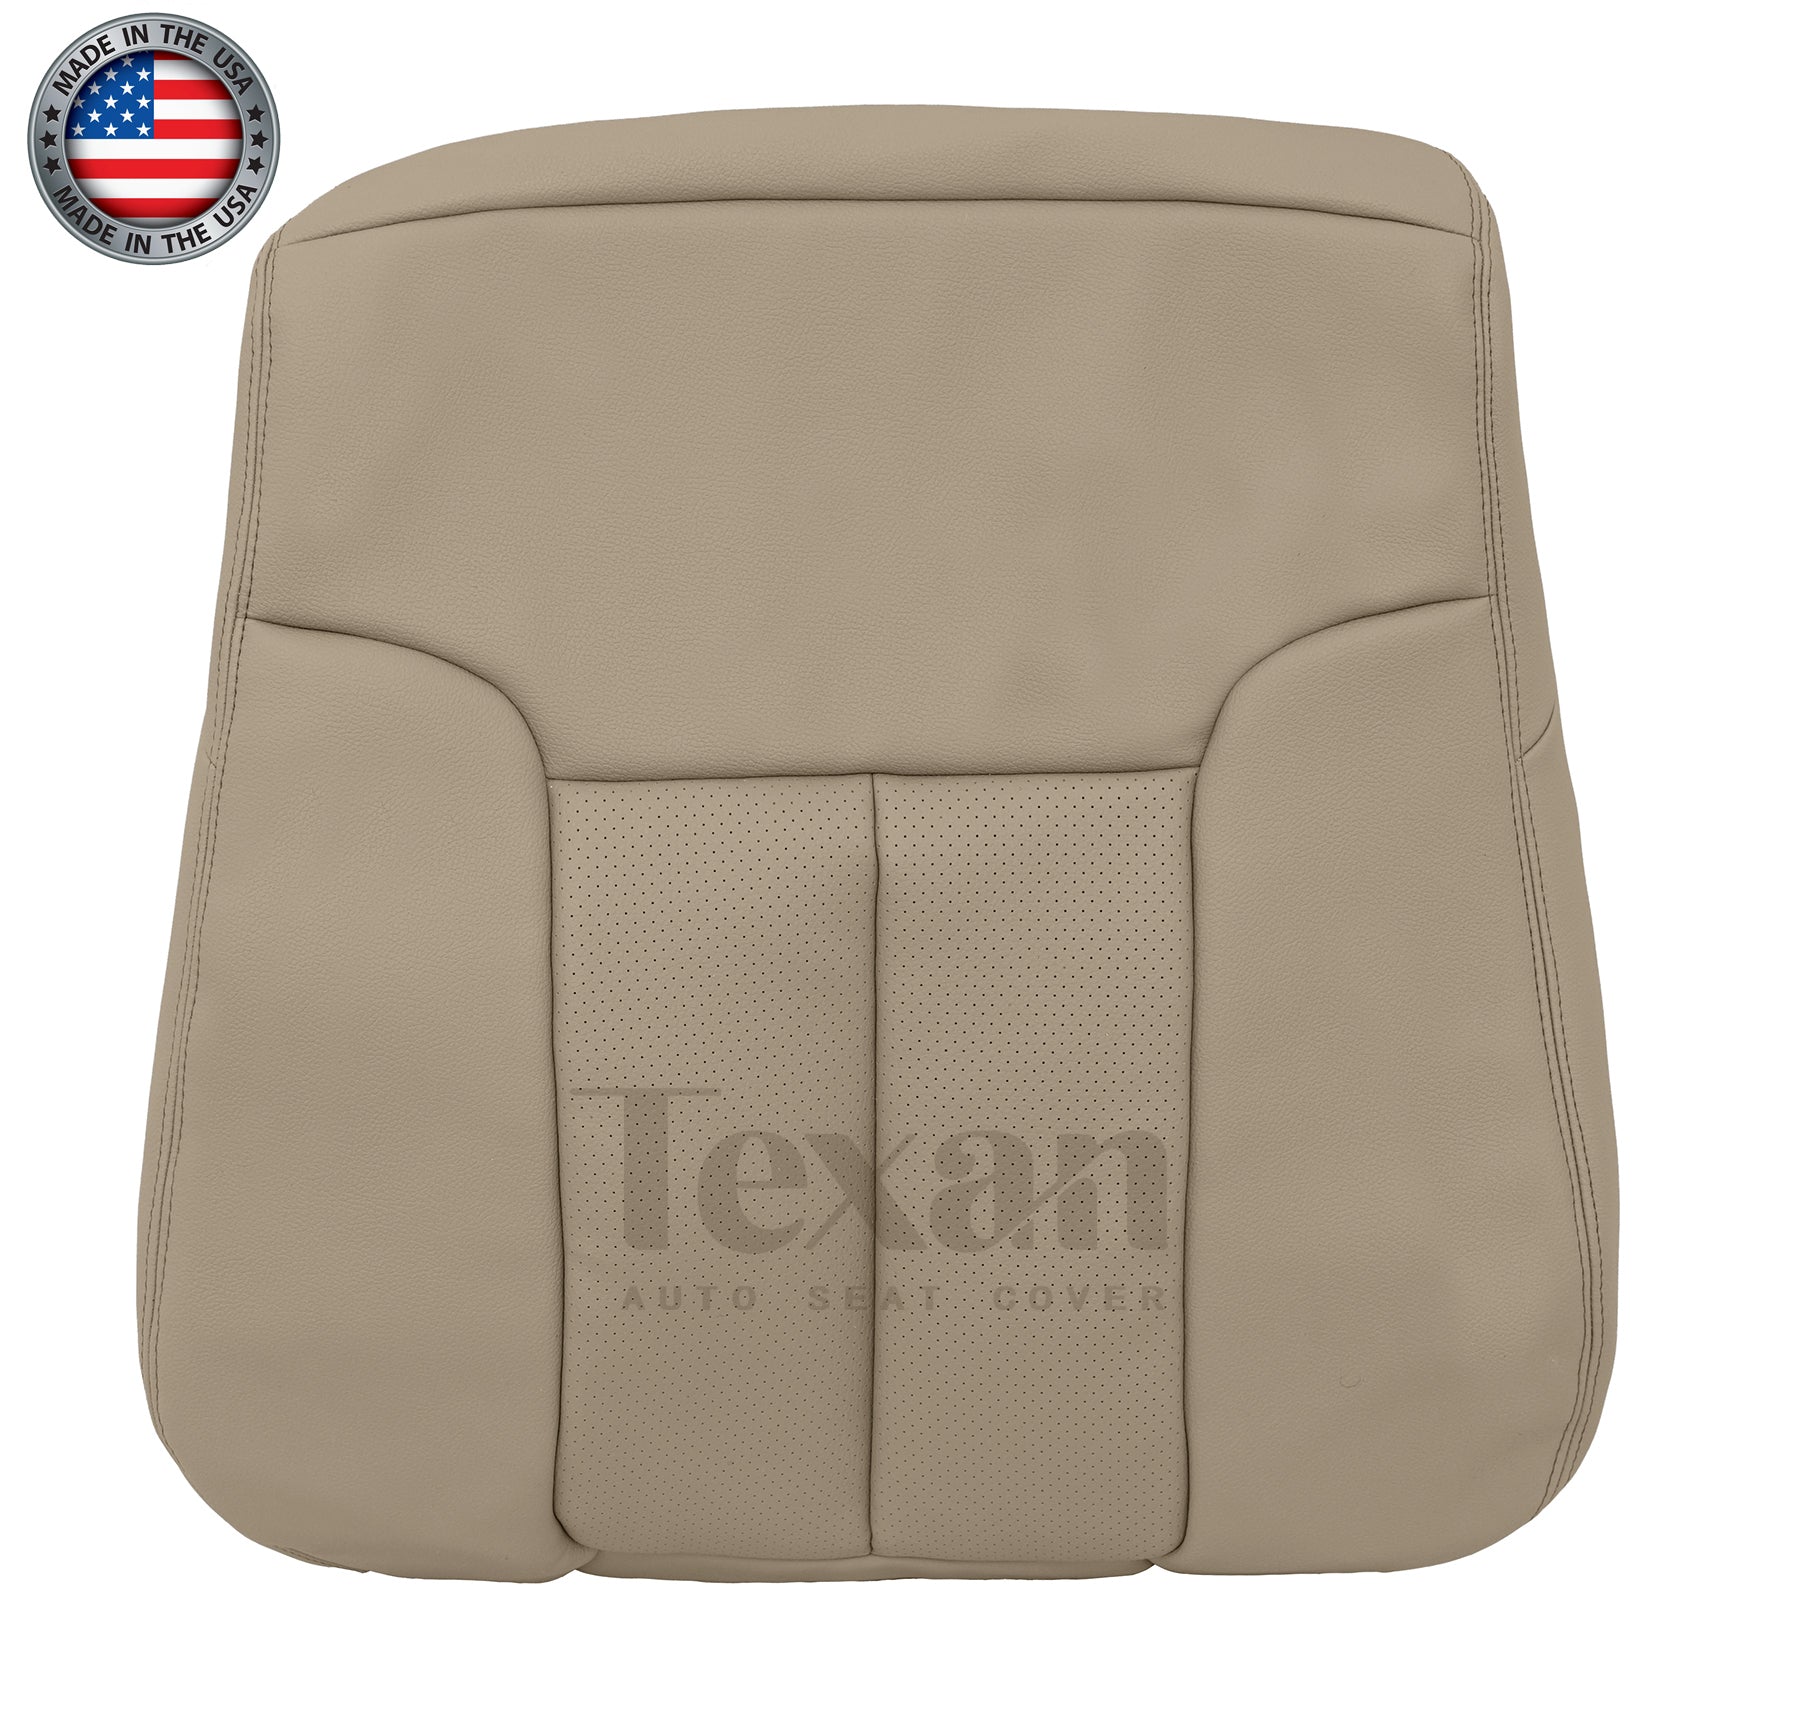 2009, 2010 Ford F150 Lariat Passenger Lean Back Perforated Leather Replacement Seat Cover tan